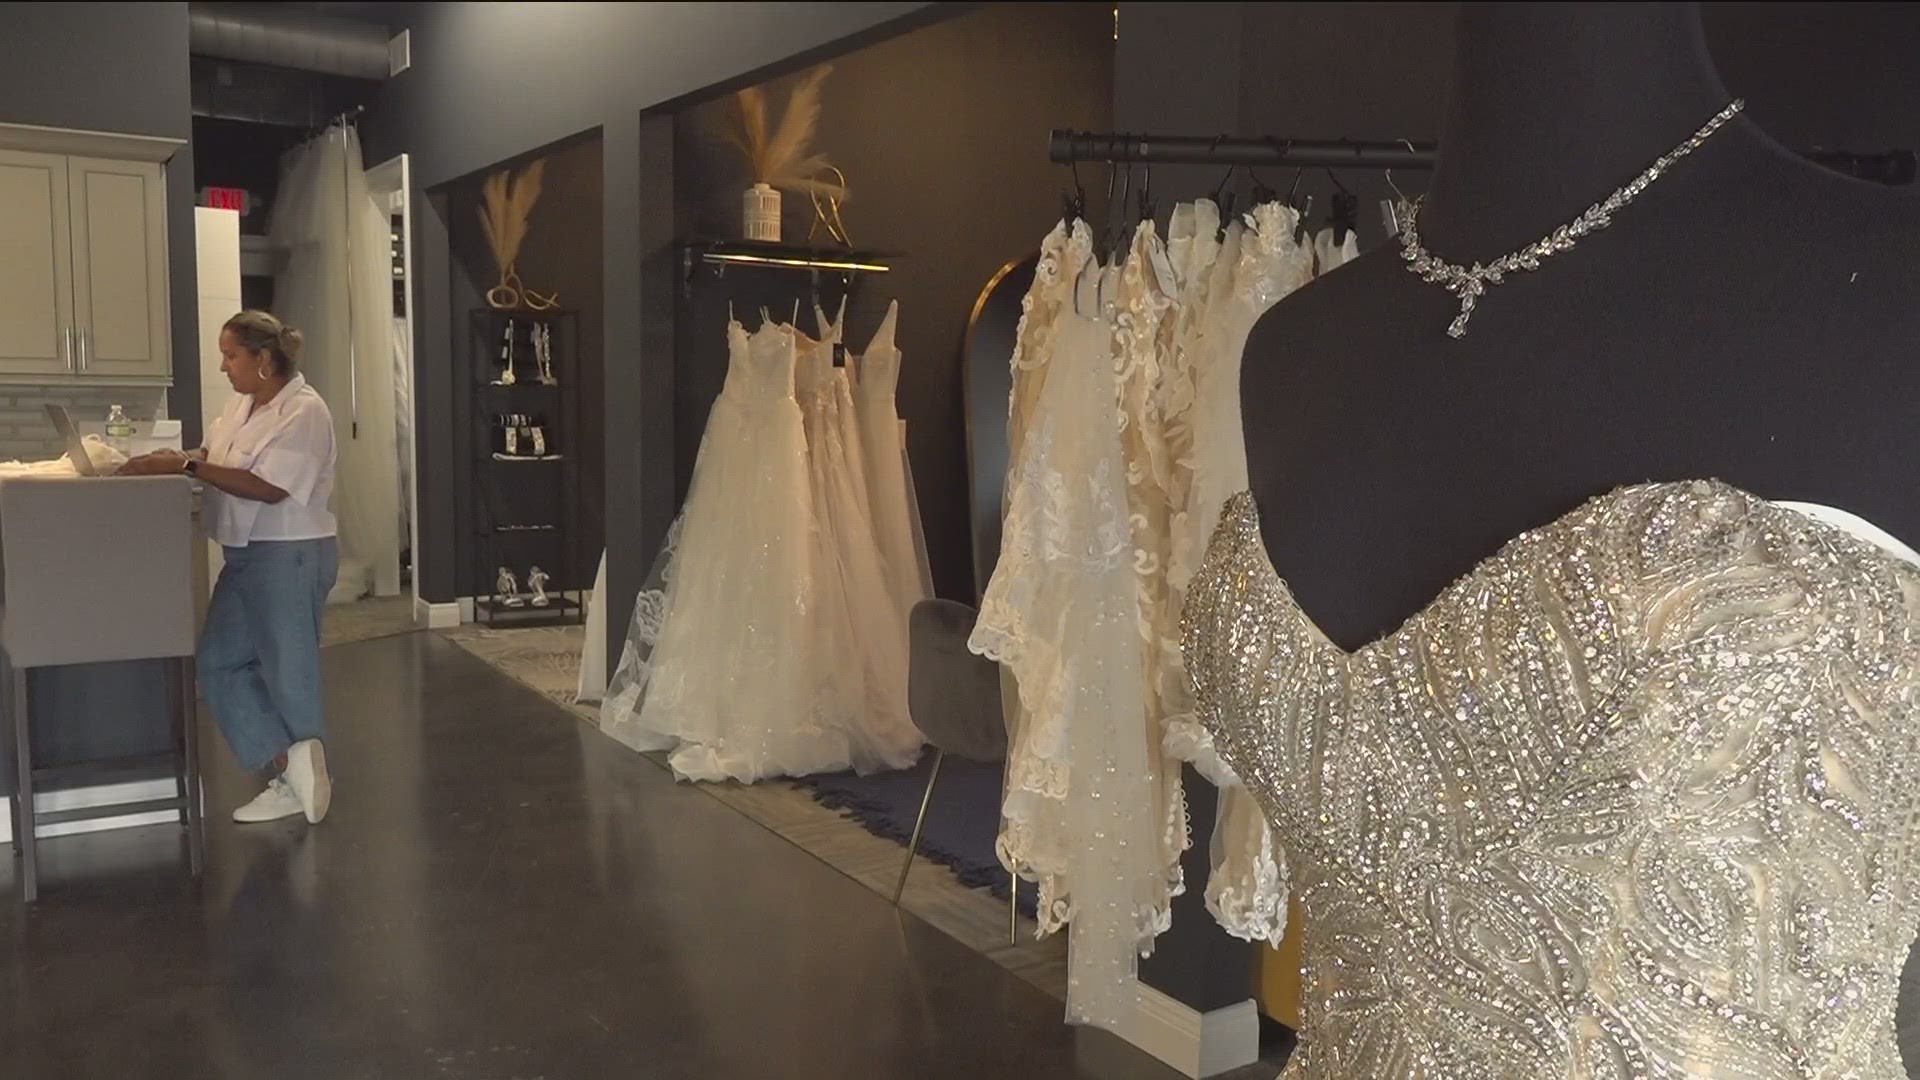 The owner of a bridal boutique is helping out Atlanta area brides who found themselves without dresses for their big day.